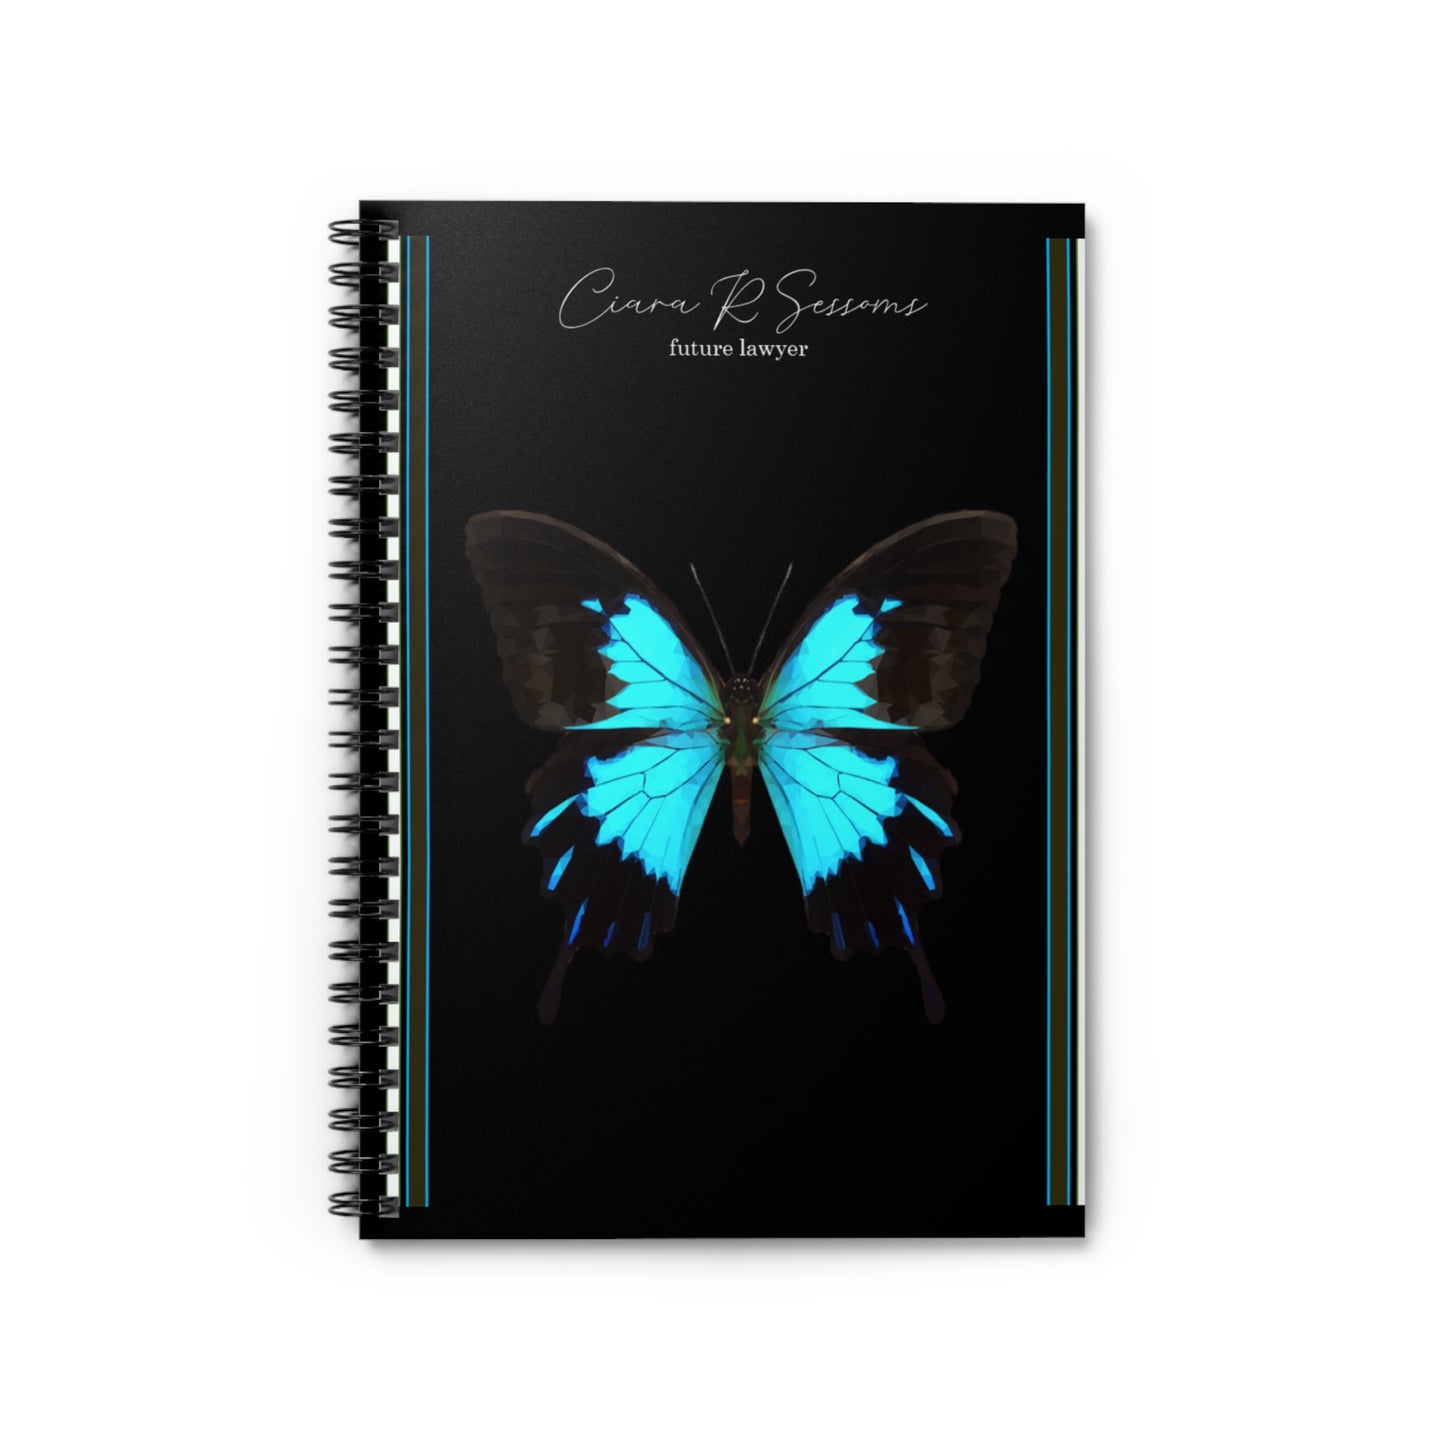 Spiral Personalized Notebook: Shopping lists, school notes or poems - 118 page spiral notebook with ruled line paper.